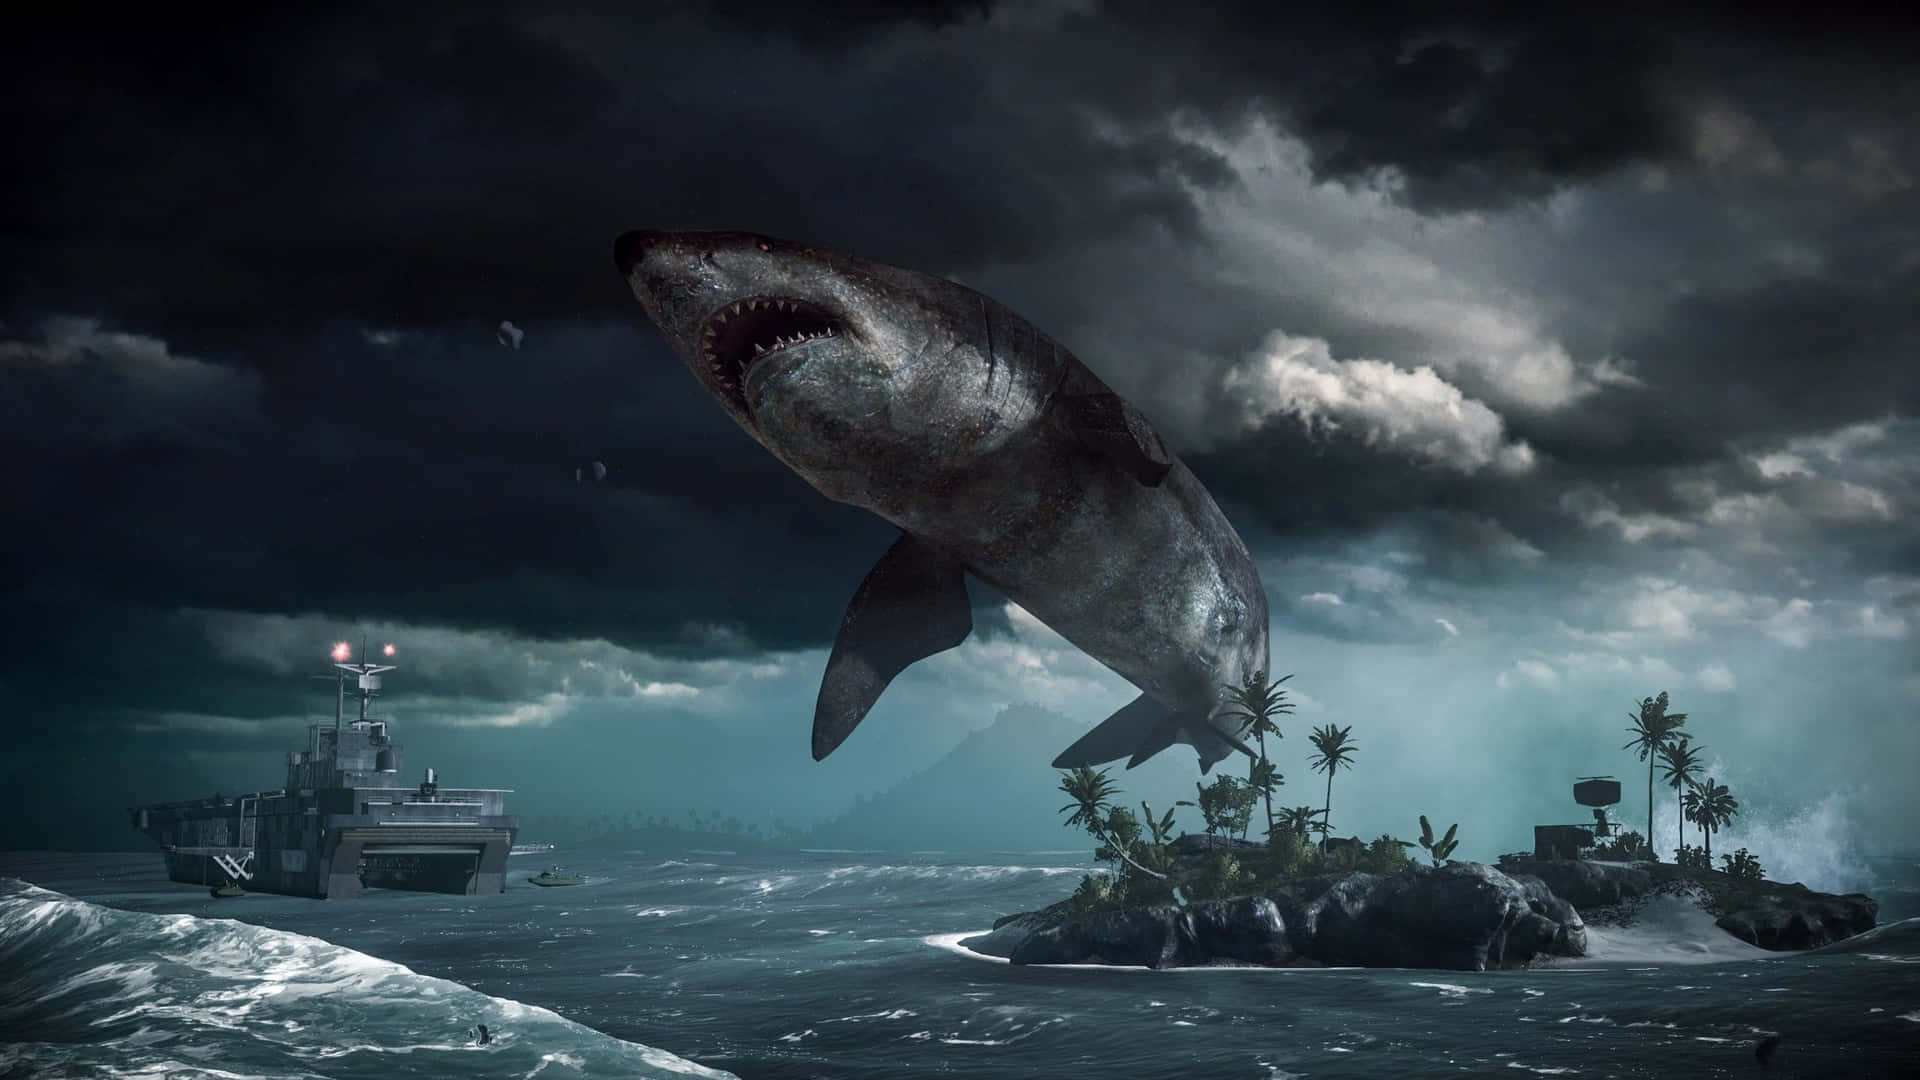 Megalodon – the Most Terrifying Predator of the Ancient Seas